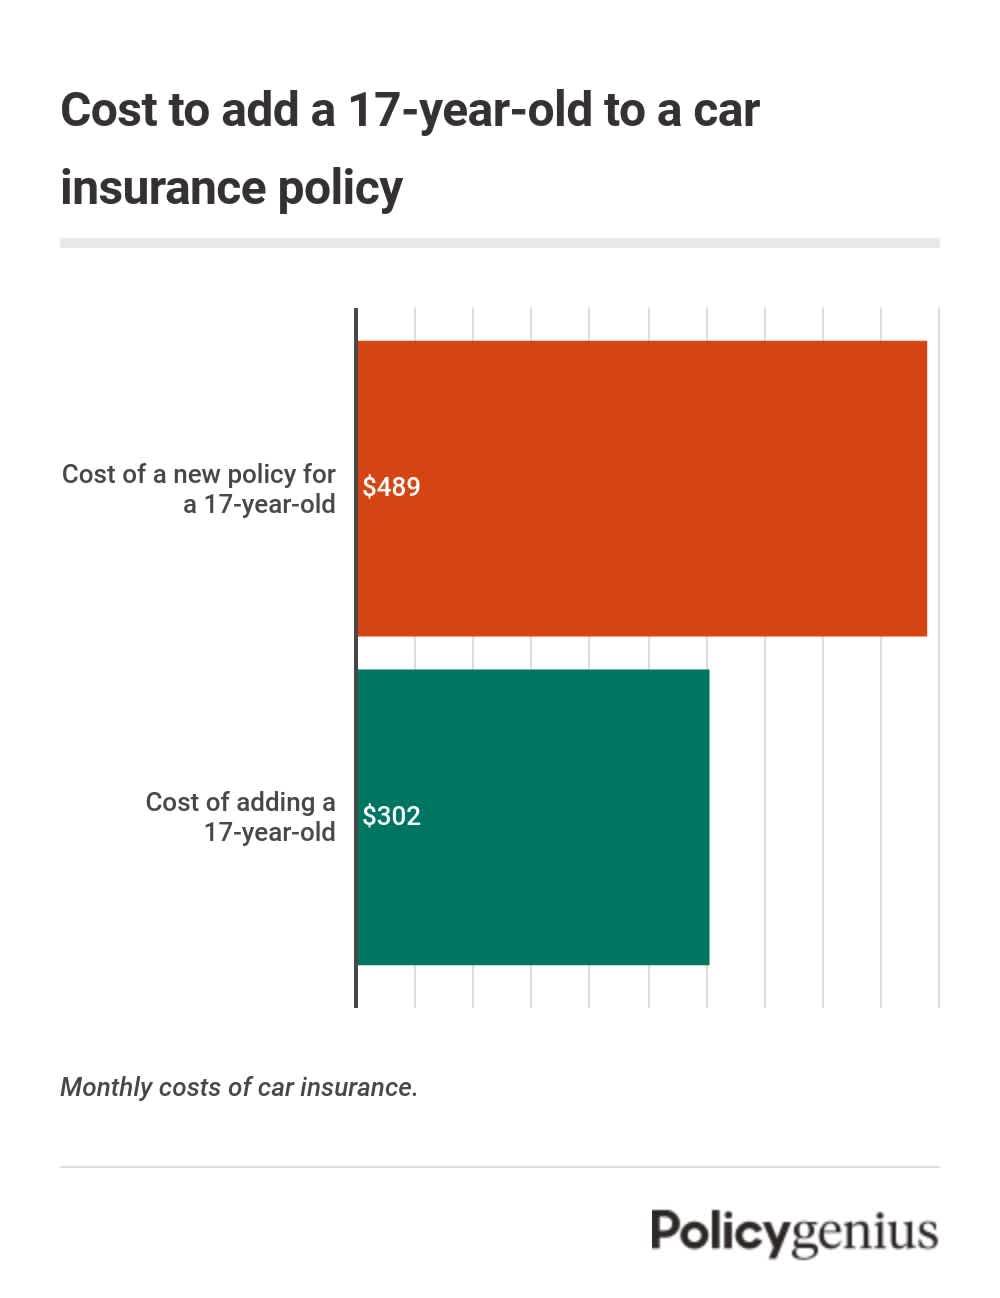 A bar graph showing the cost to add a 17-year-old to an existing policy.